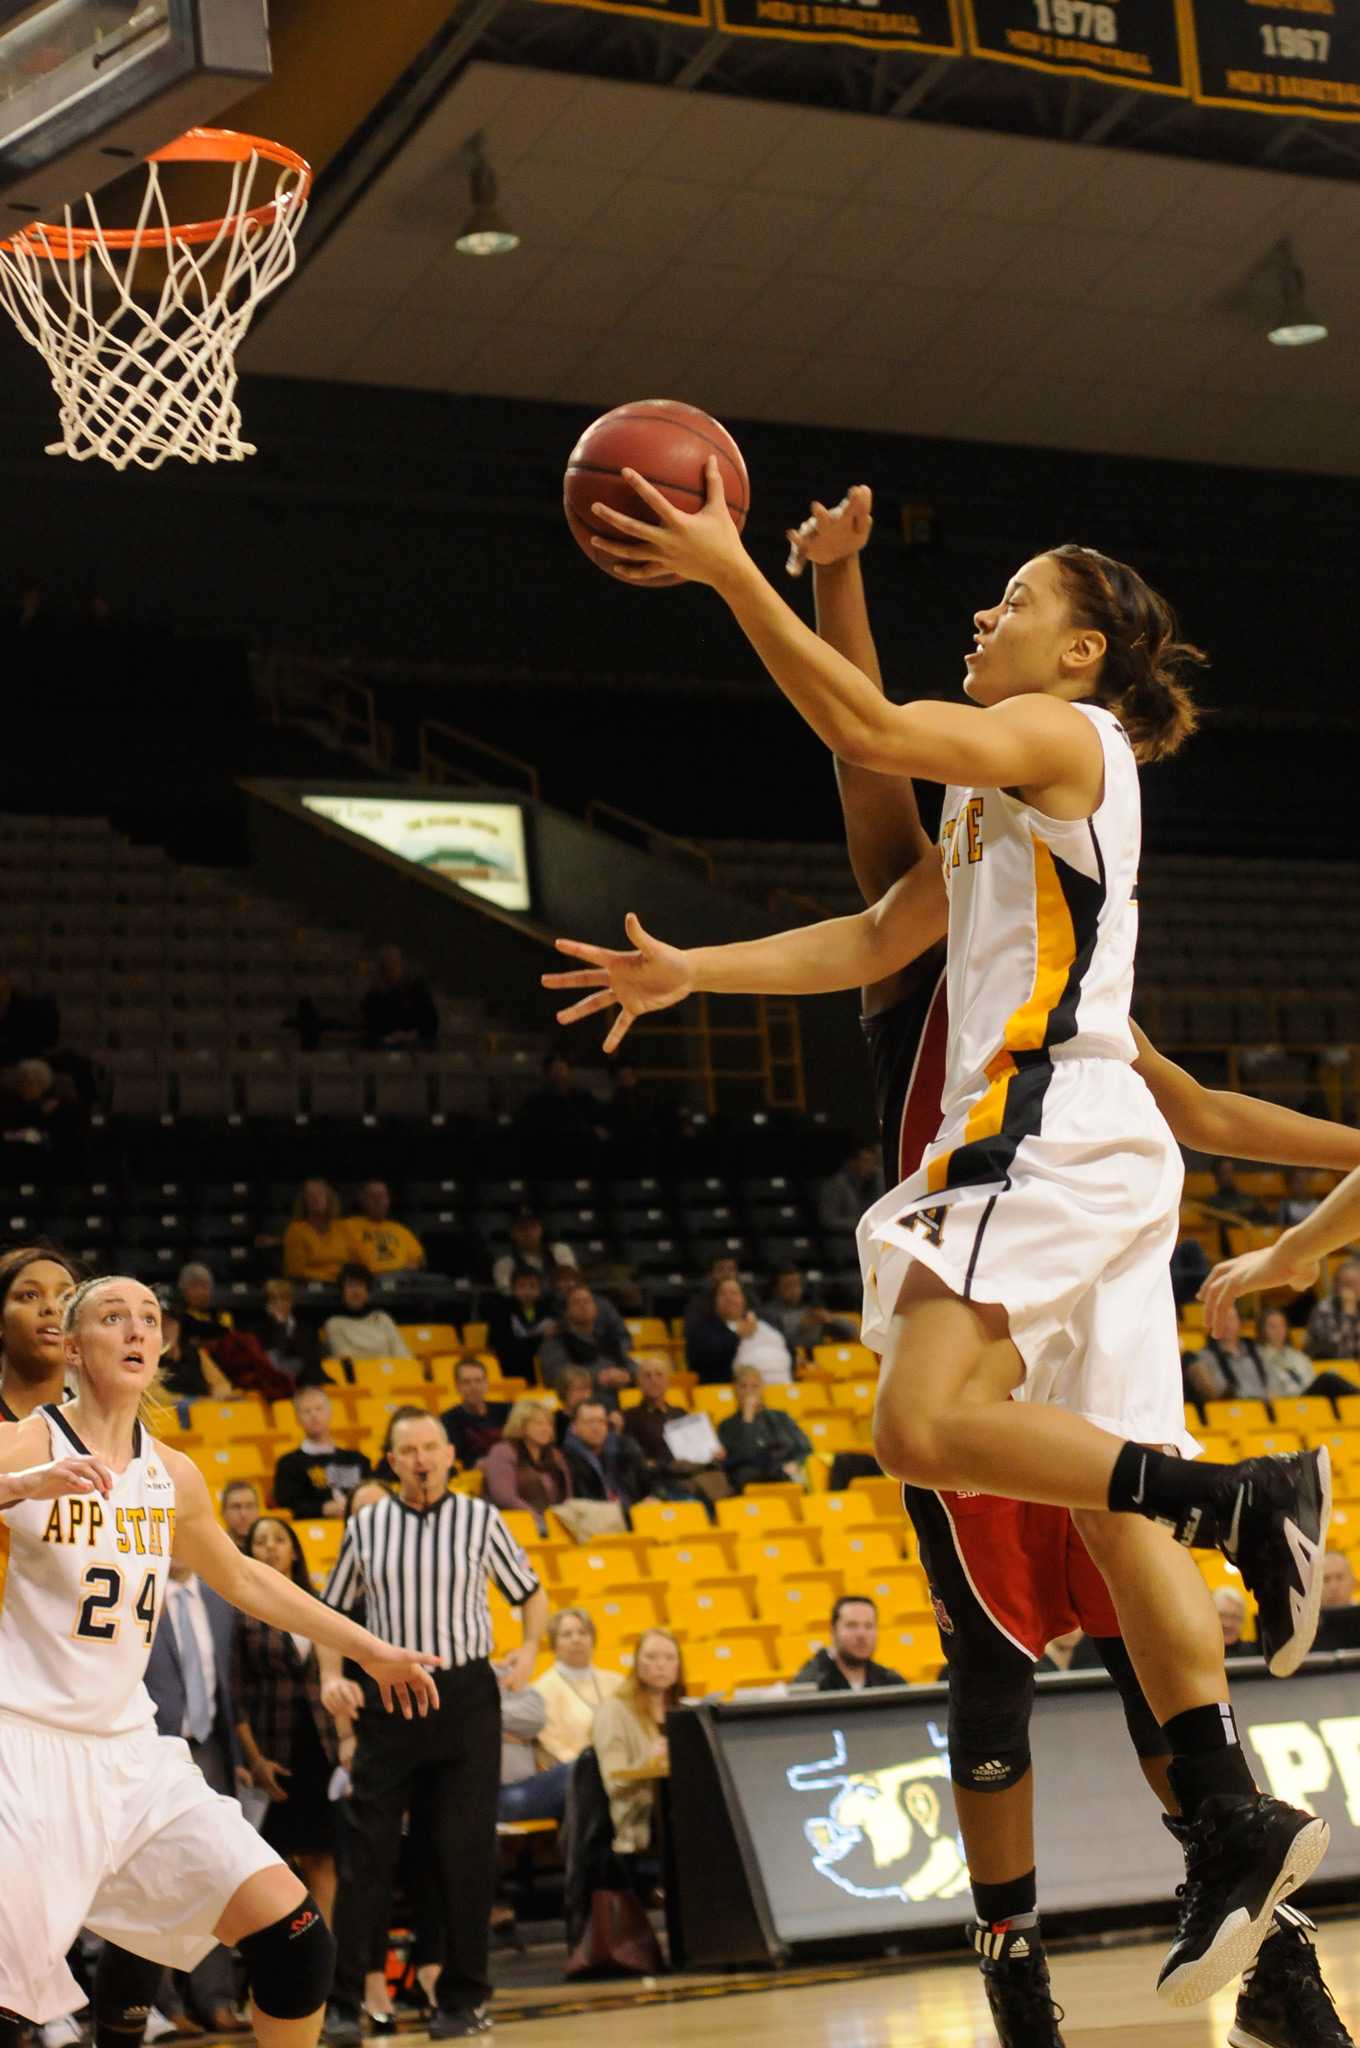 Sophomore guard Bria Carter drives to the basket against the Arkansas State defense Thursday. The Mountaineers were able to recover from a 15 point deficit in the last ten minutes of play, securing a 70-69 win over the first-place ranked Red Wolves. Photo by Justin Perry  |  The Appalachian